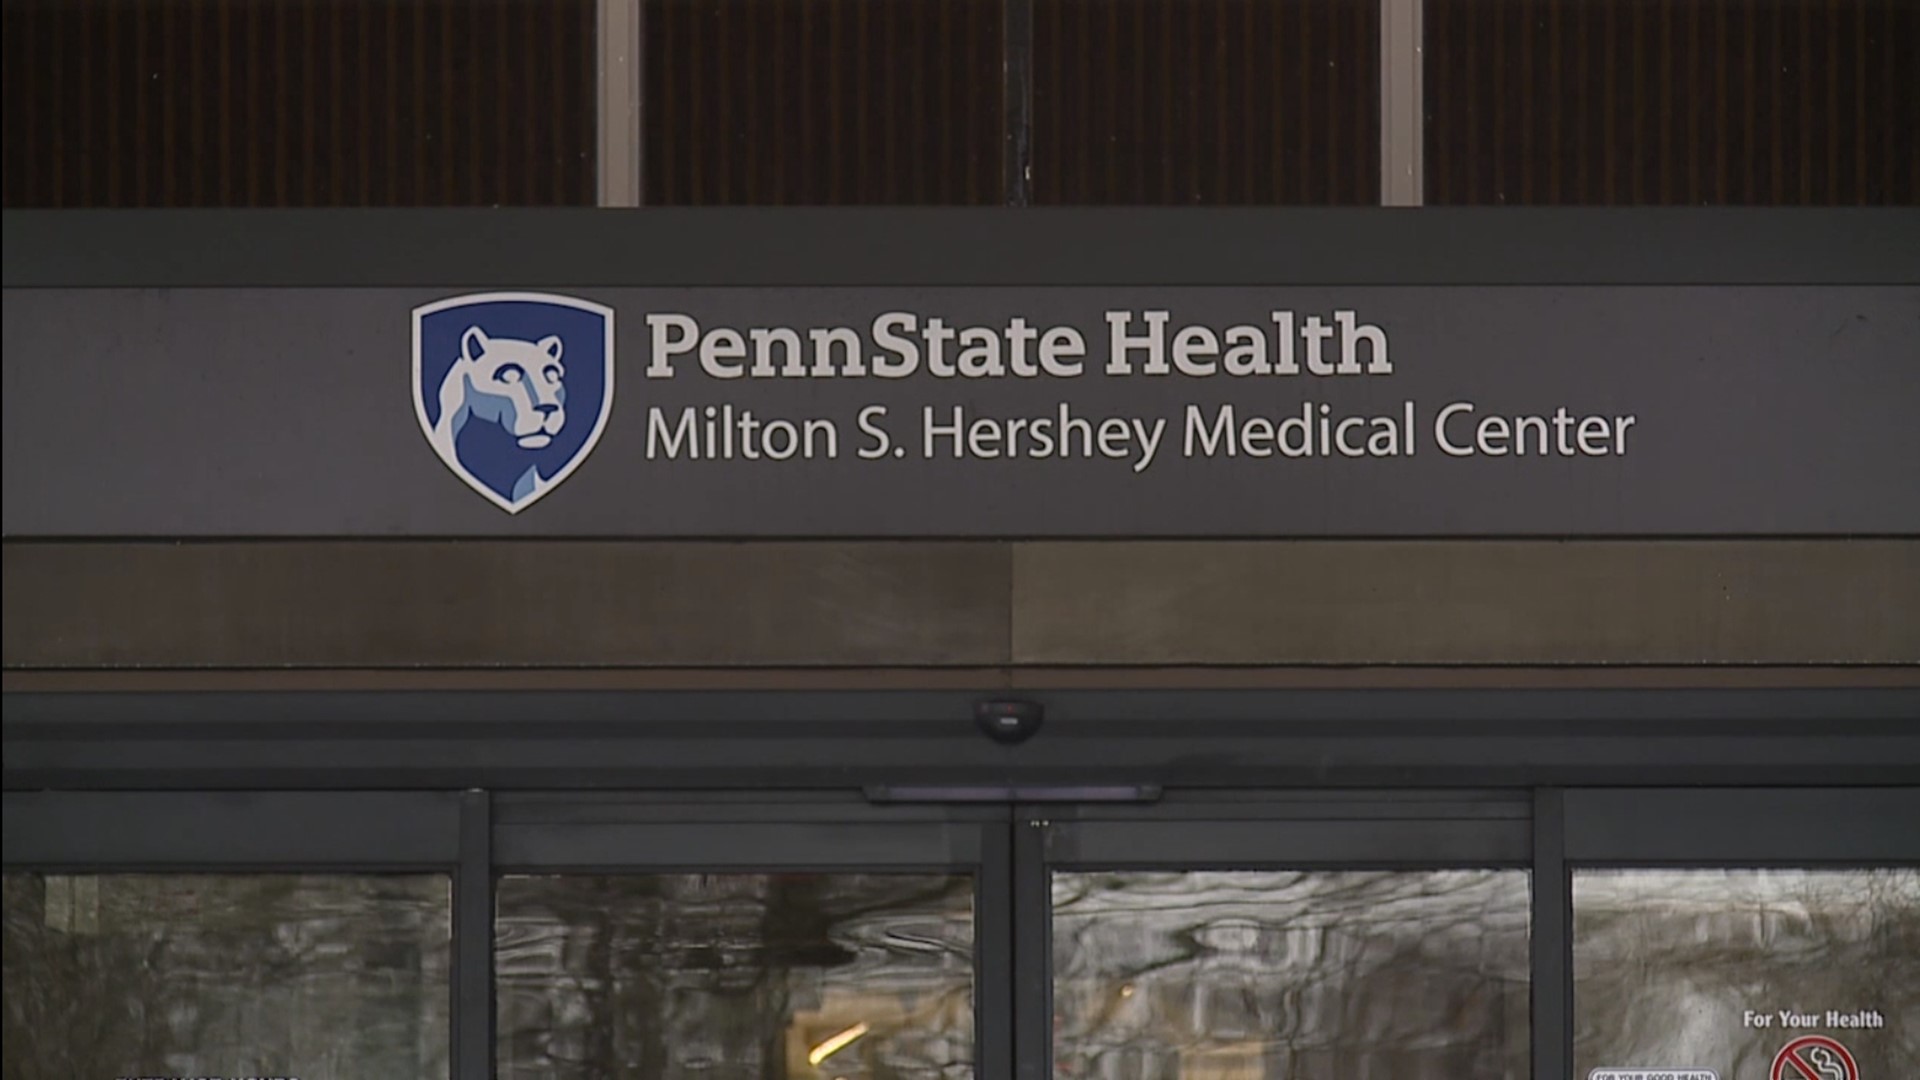 Penn State Health Milton S. Hershey Medical Center stopped performing kidney and liver transplants following reports of serious problems.